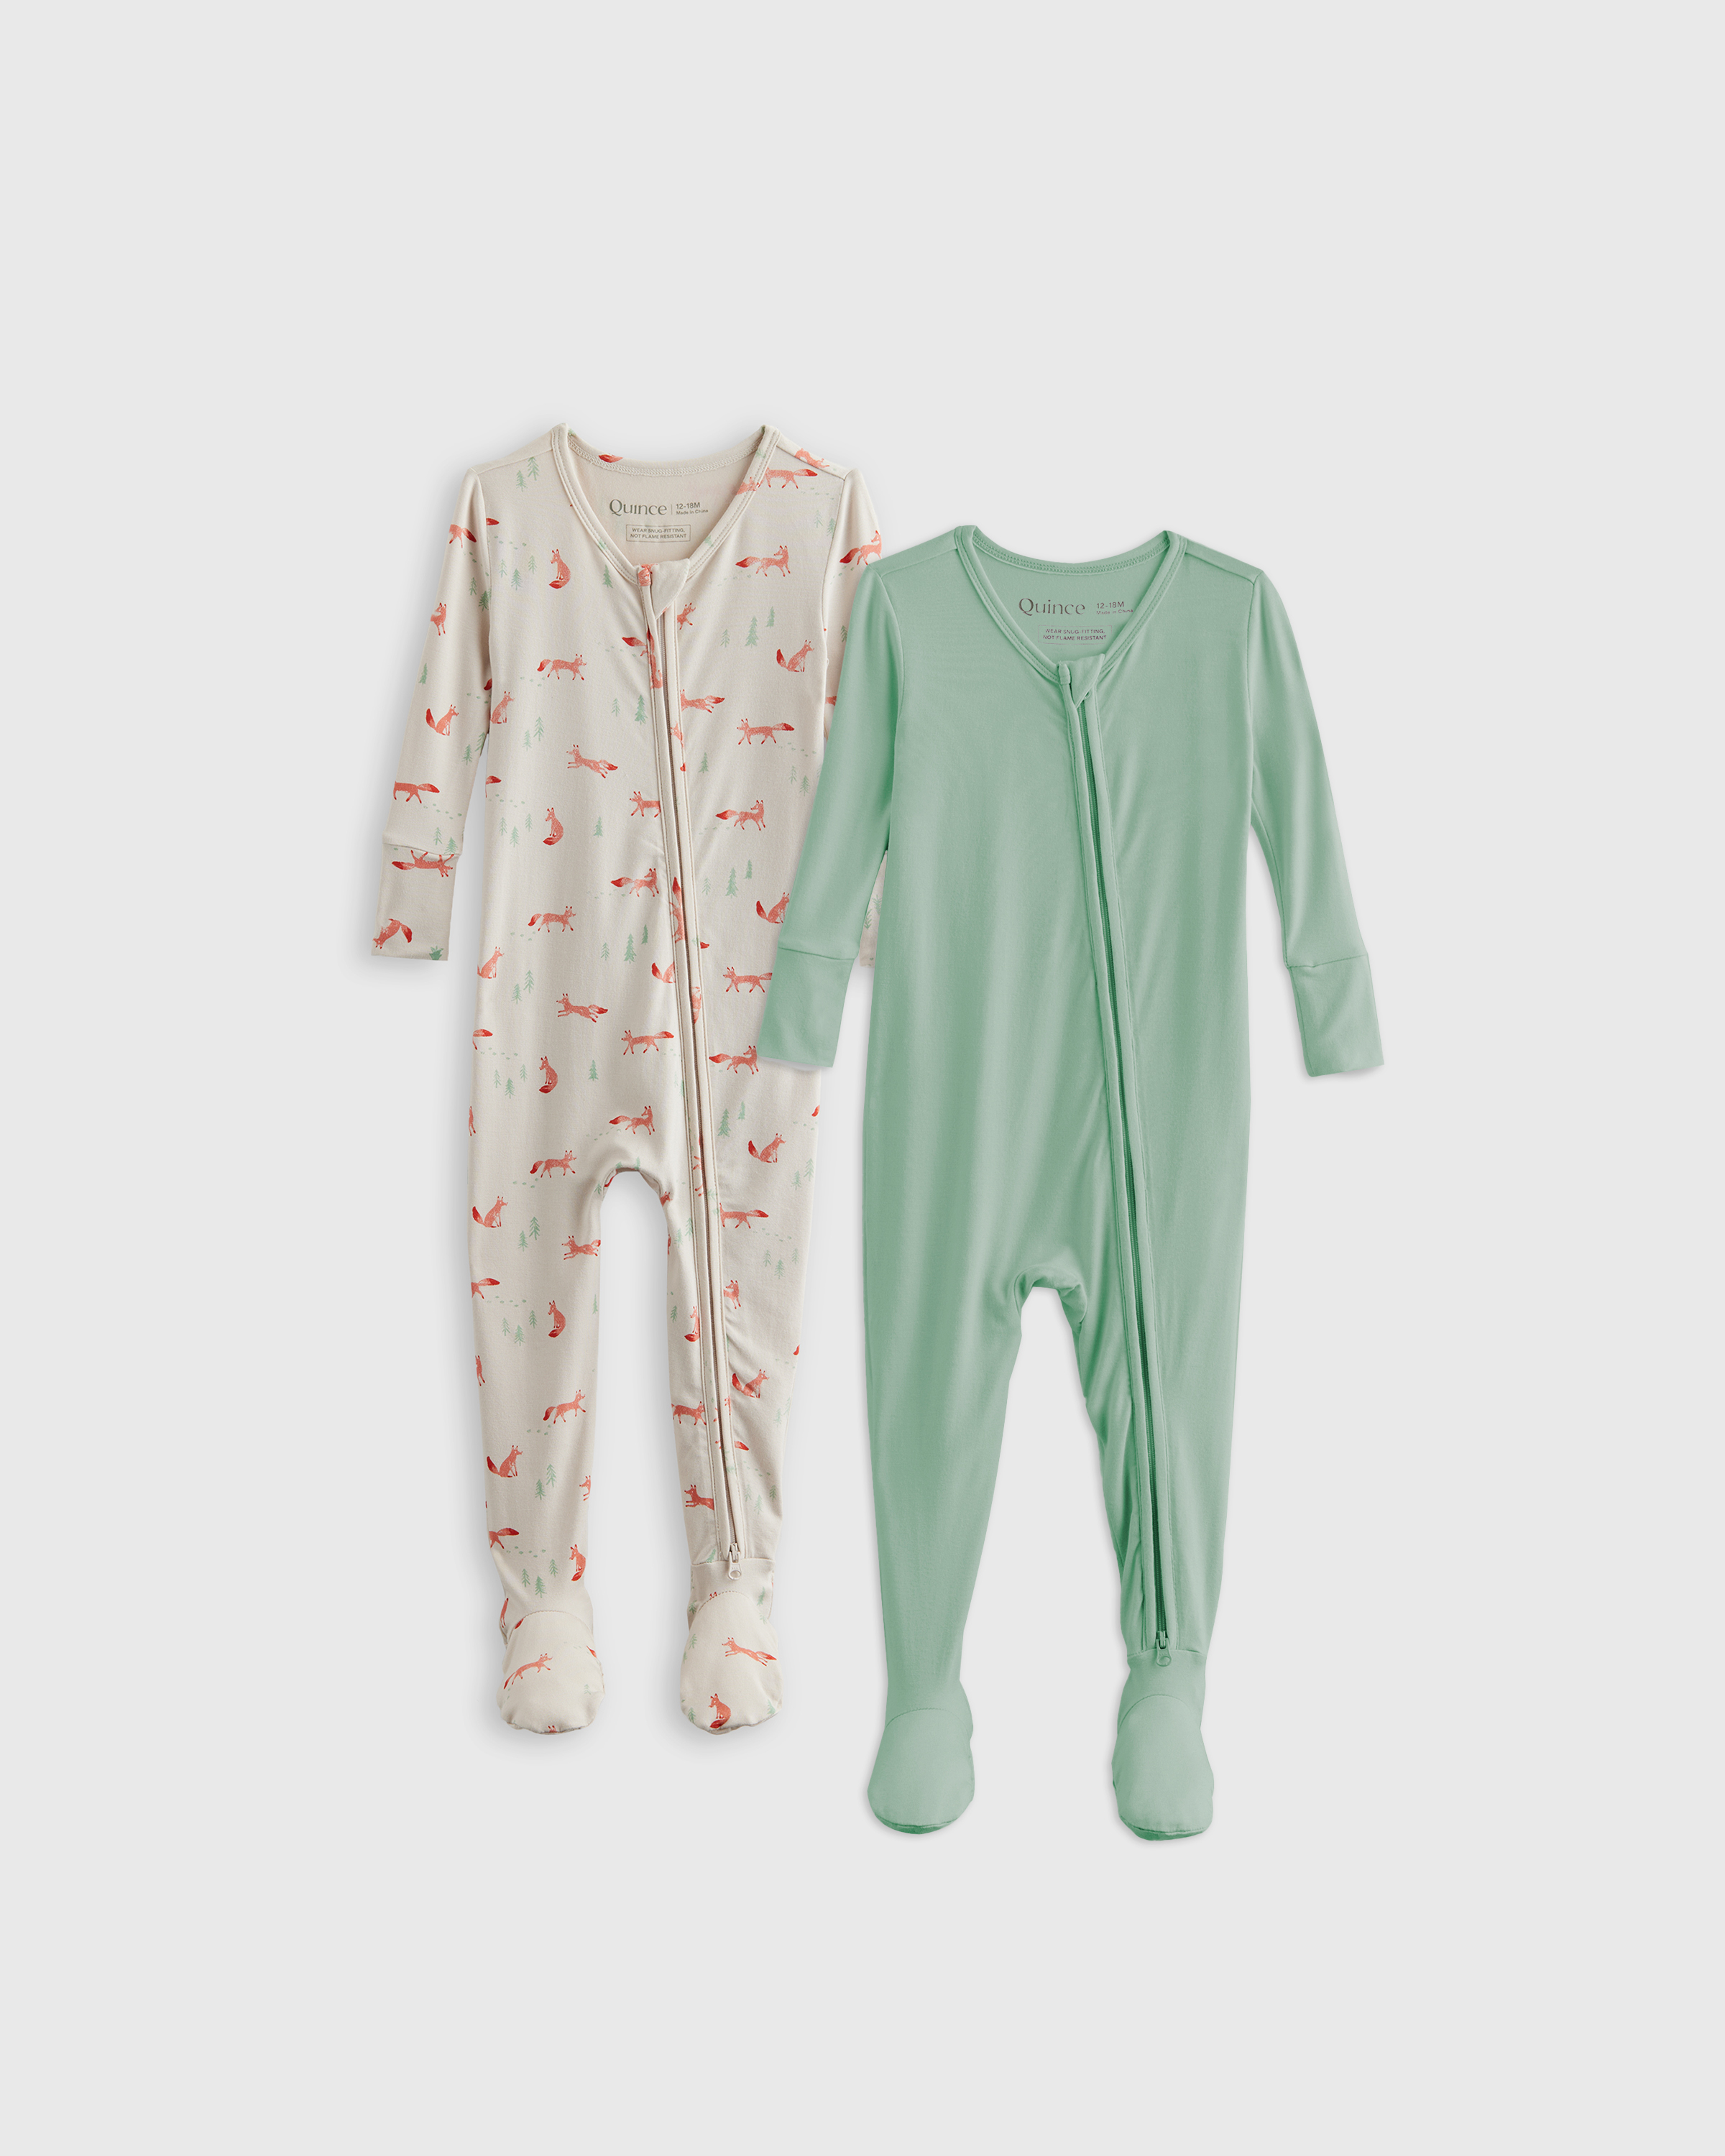 How Loose or Tight do Pajamas Need To Be? – The Baby Cubby